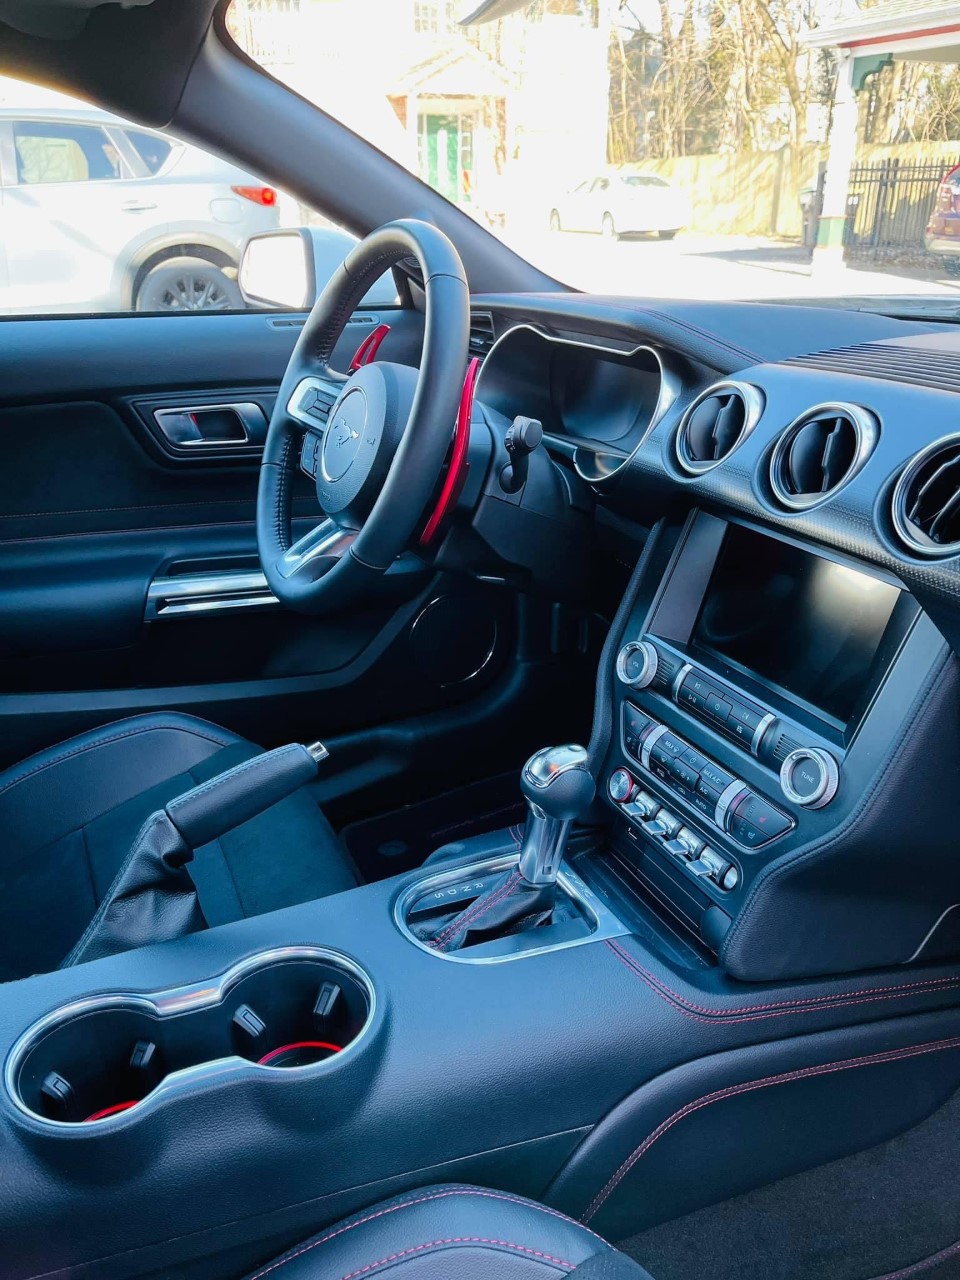 S650 Mustang The new dashboard is a big mistake IMO thumbnail_image0